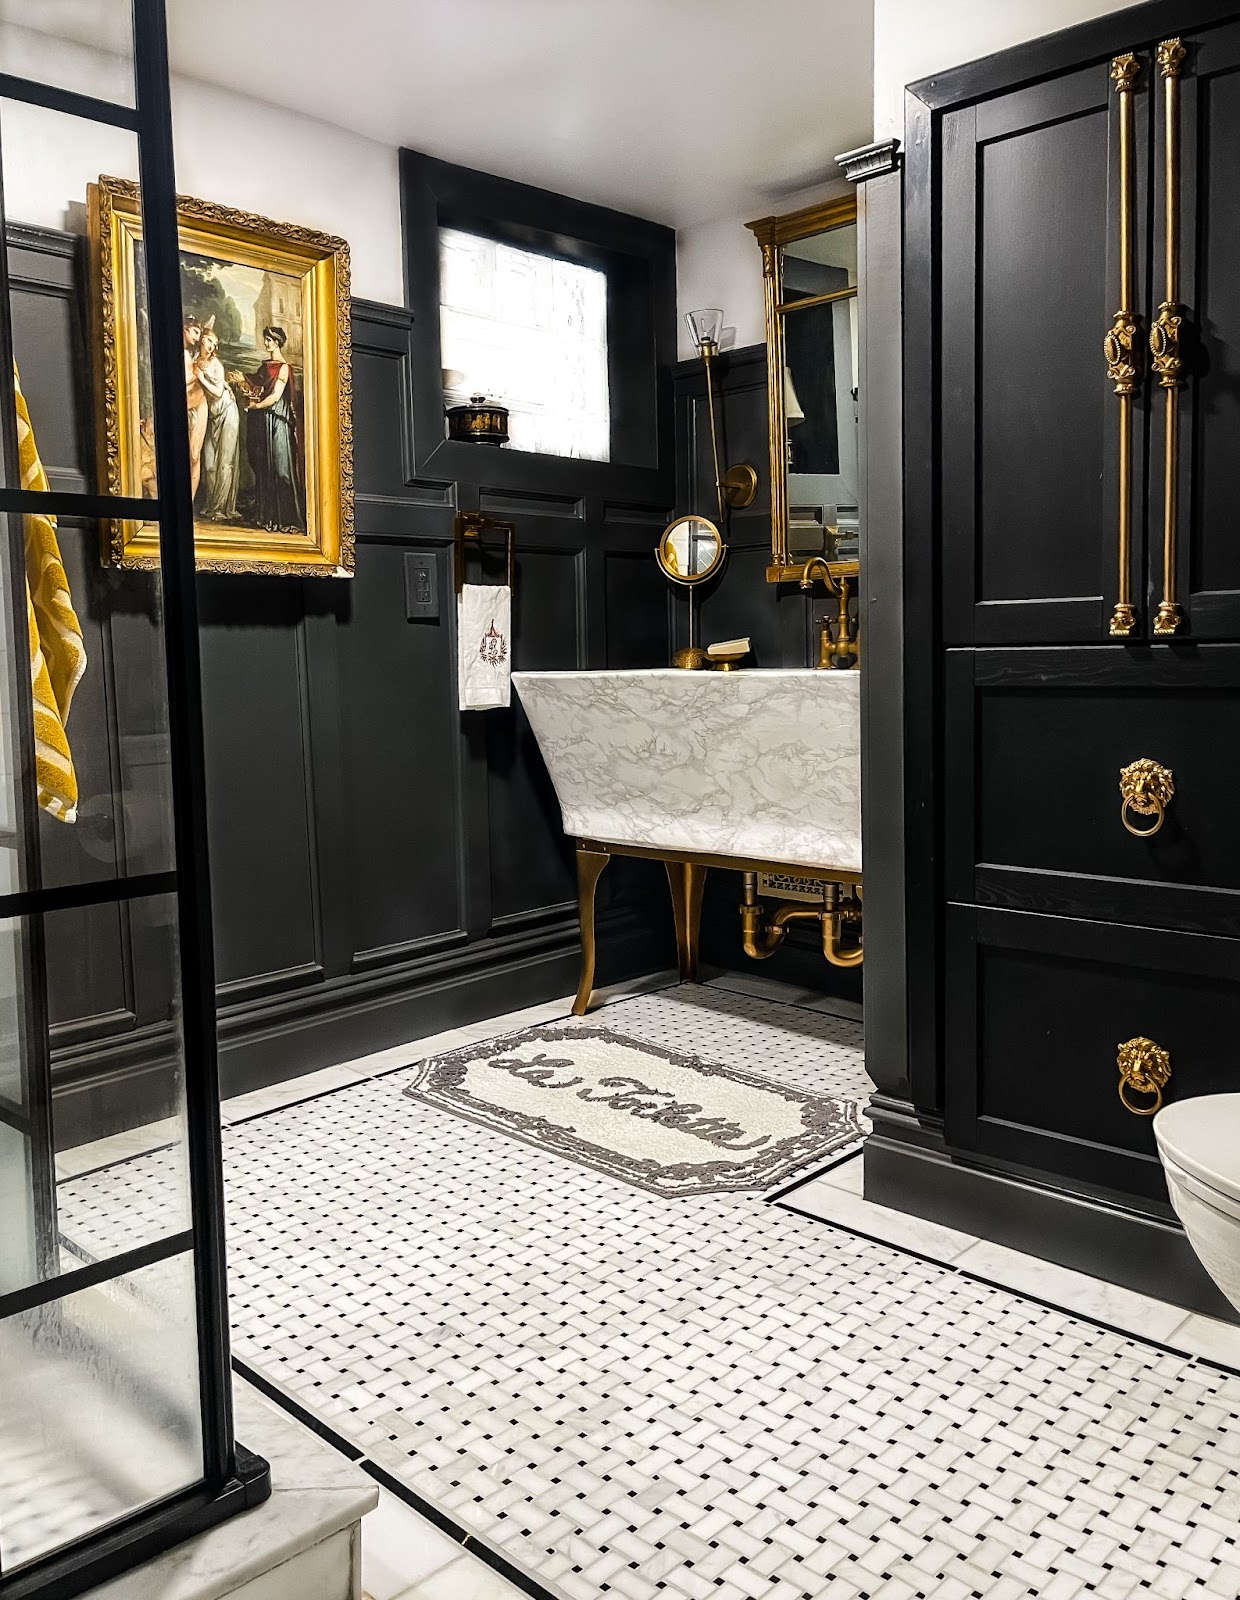 Ashley's traditional black and white colored bathroom is styled with an oil painting, marble sink, and a large French gilt mirror